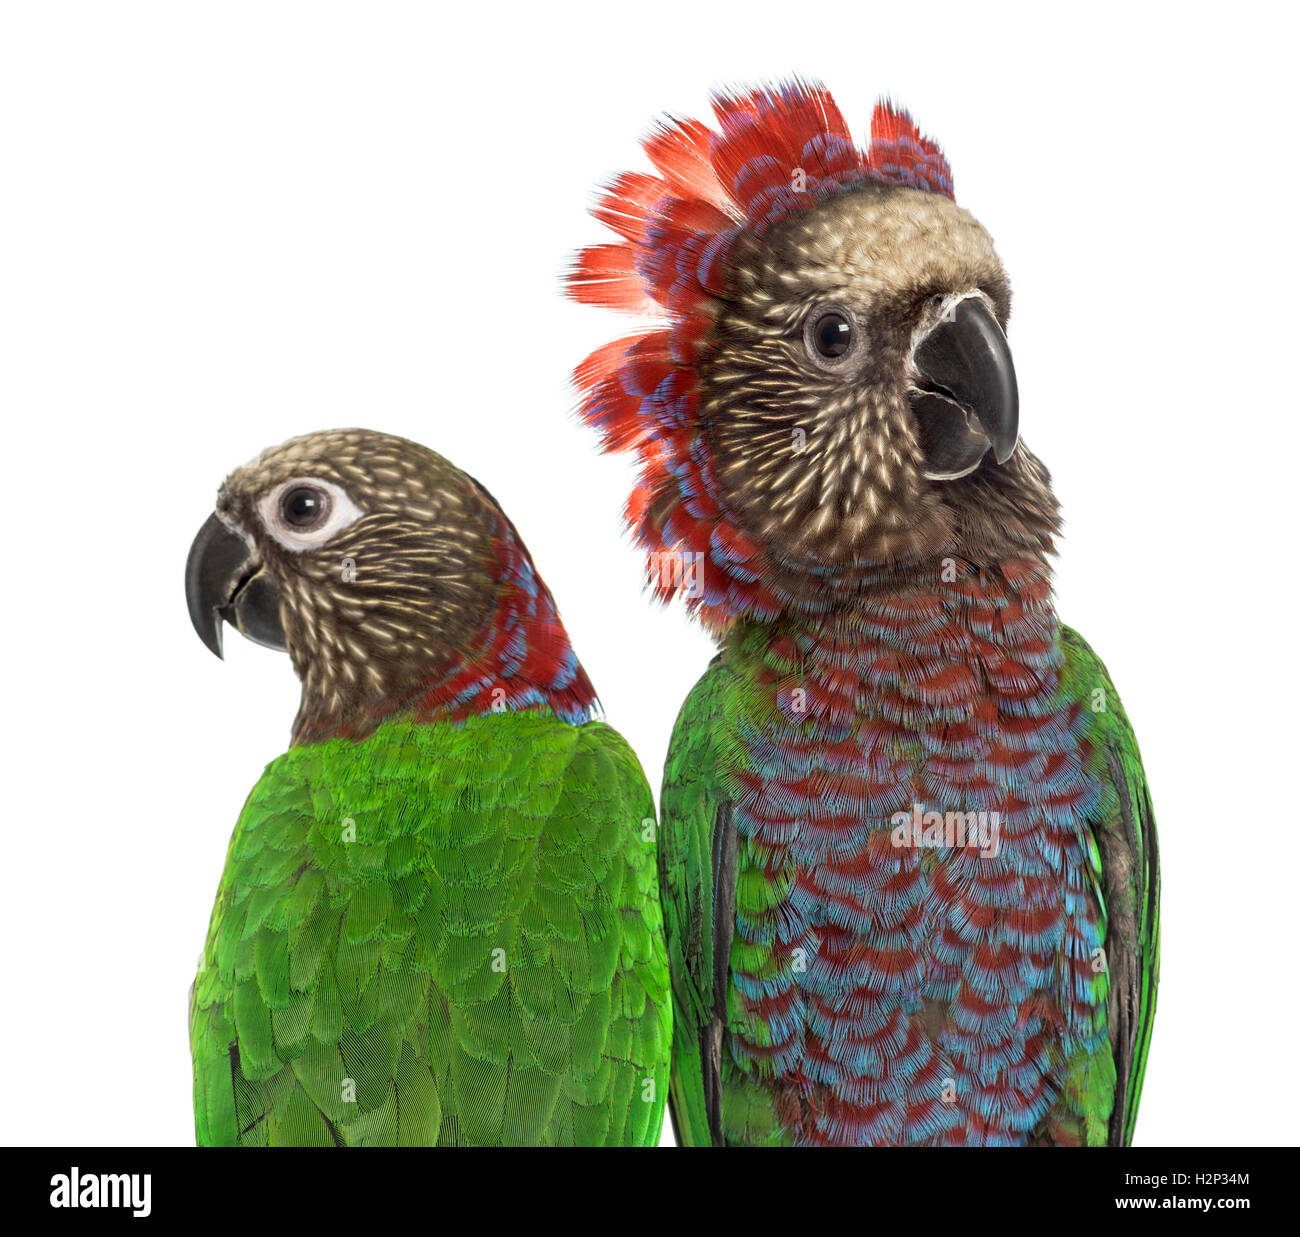 Close-up of a couple of Red-fan parrot Deroptyus accipitrinus, isolated on white Banque D'Images